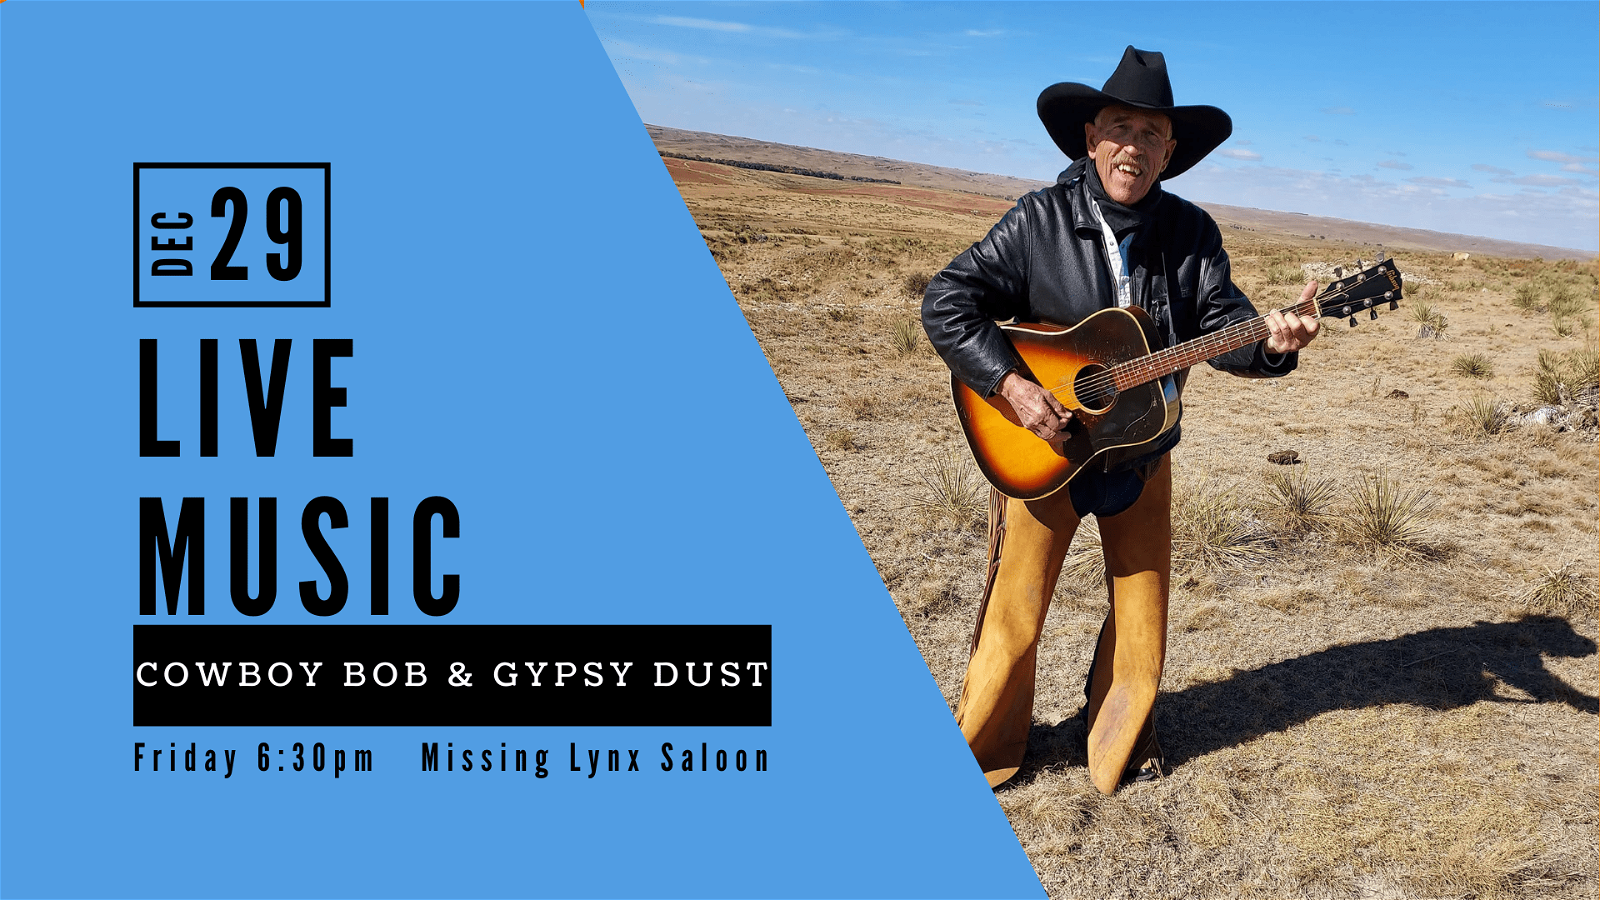 Cowboy Bob & Gypsy Dust appearing live in the Missing Lynx Saloon at Great Divide